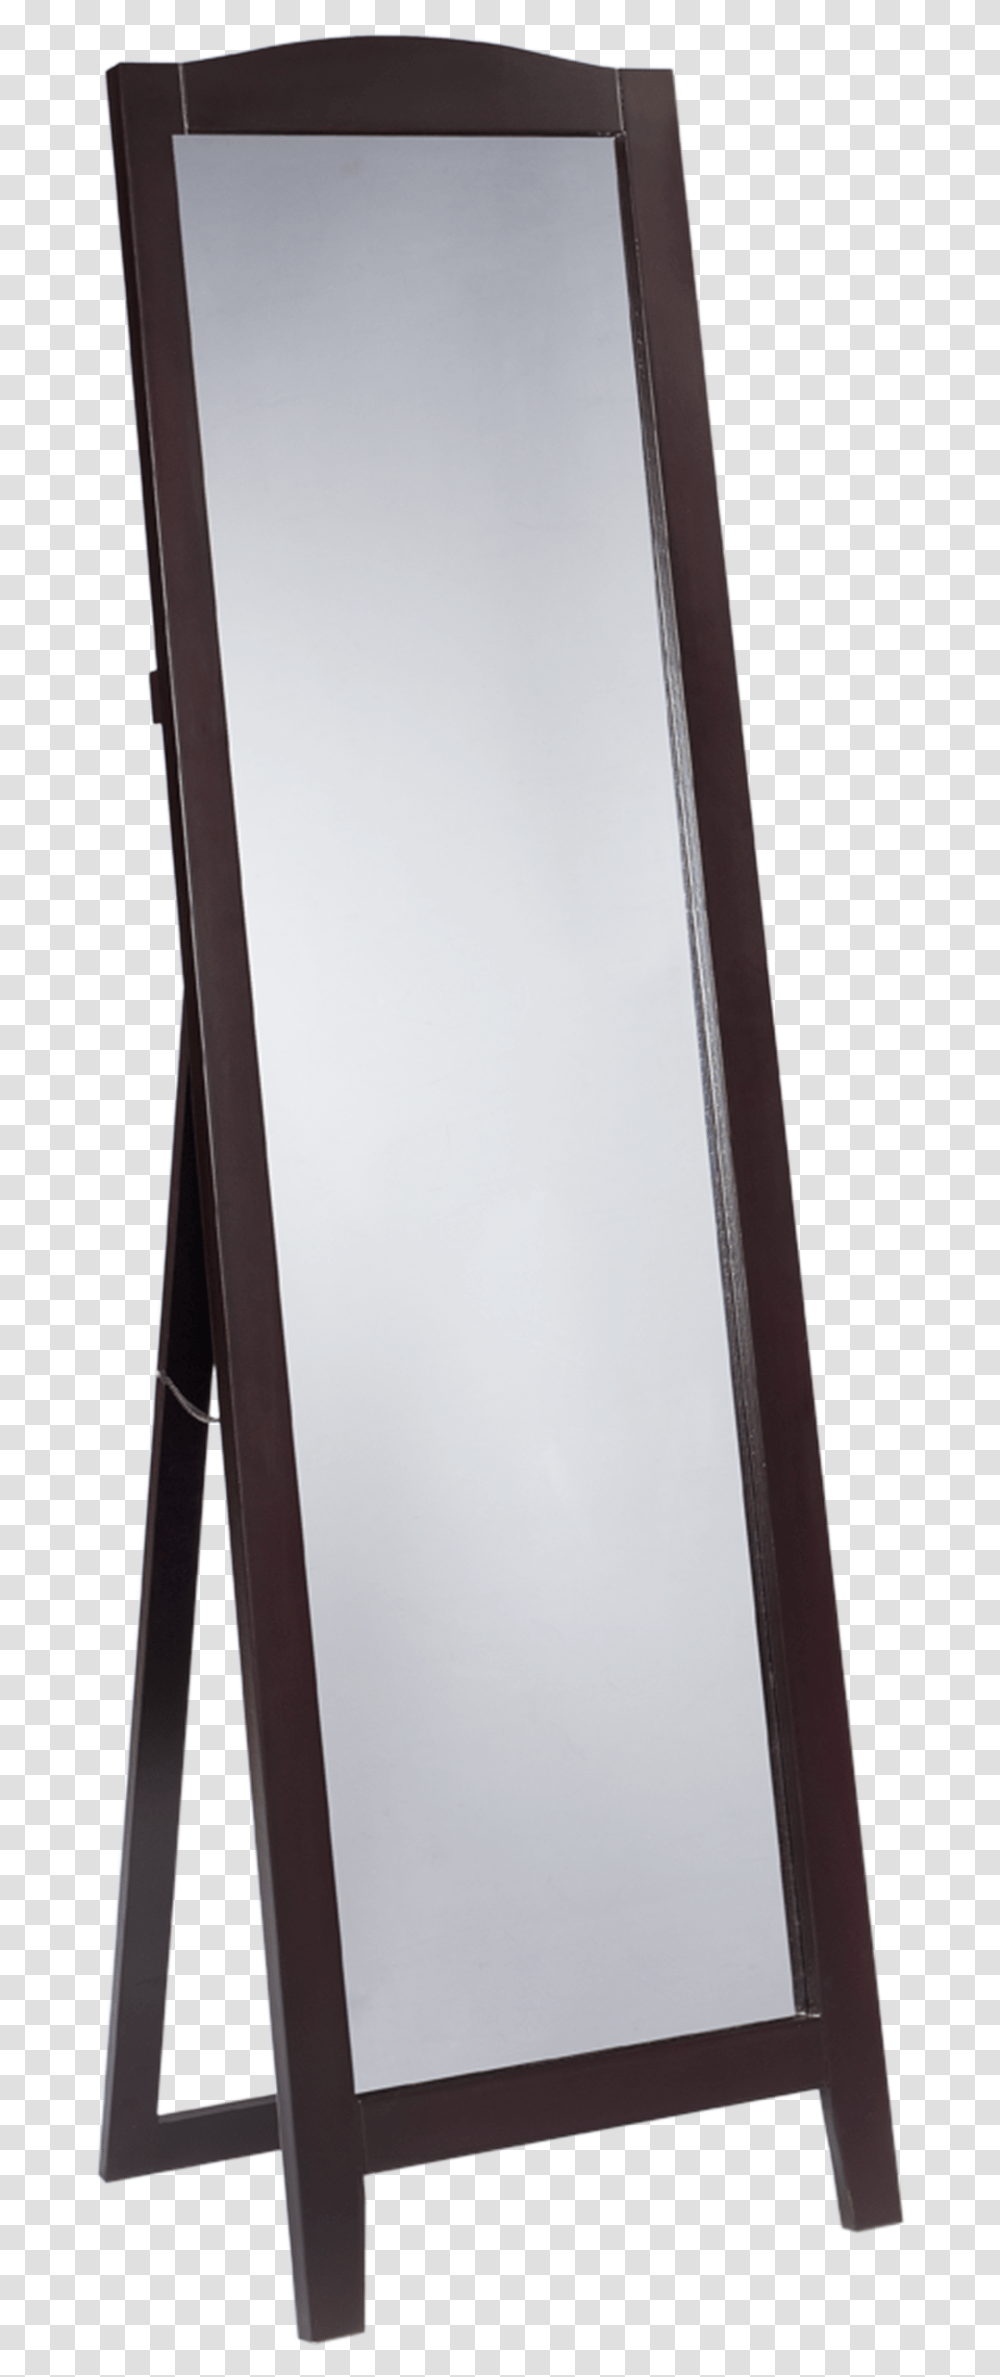 Easel Mirror Transparent Png